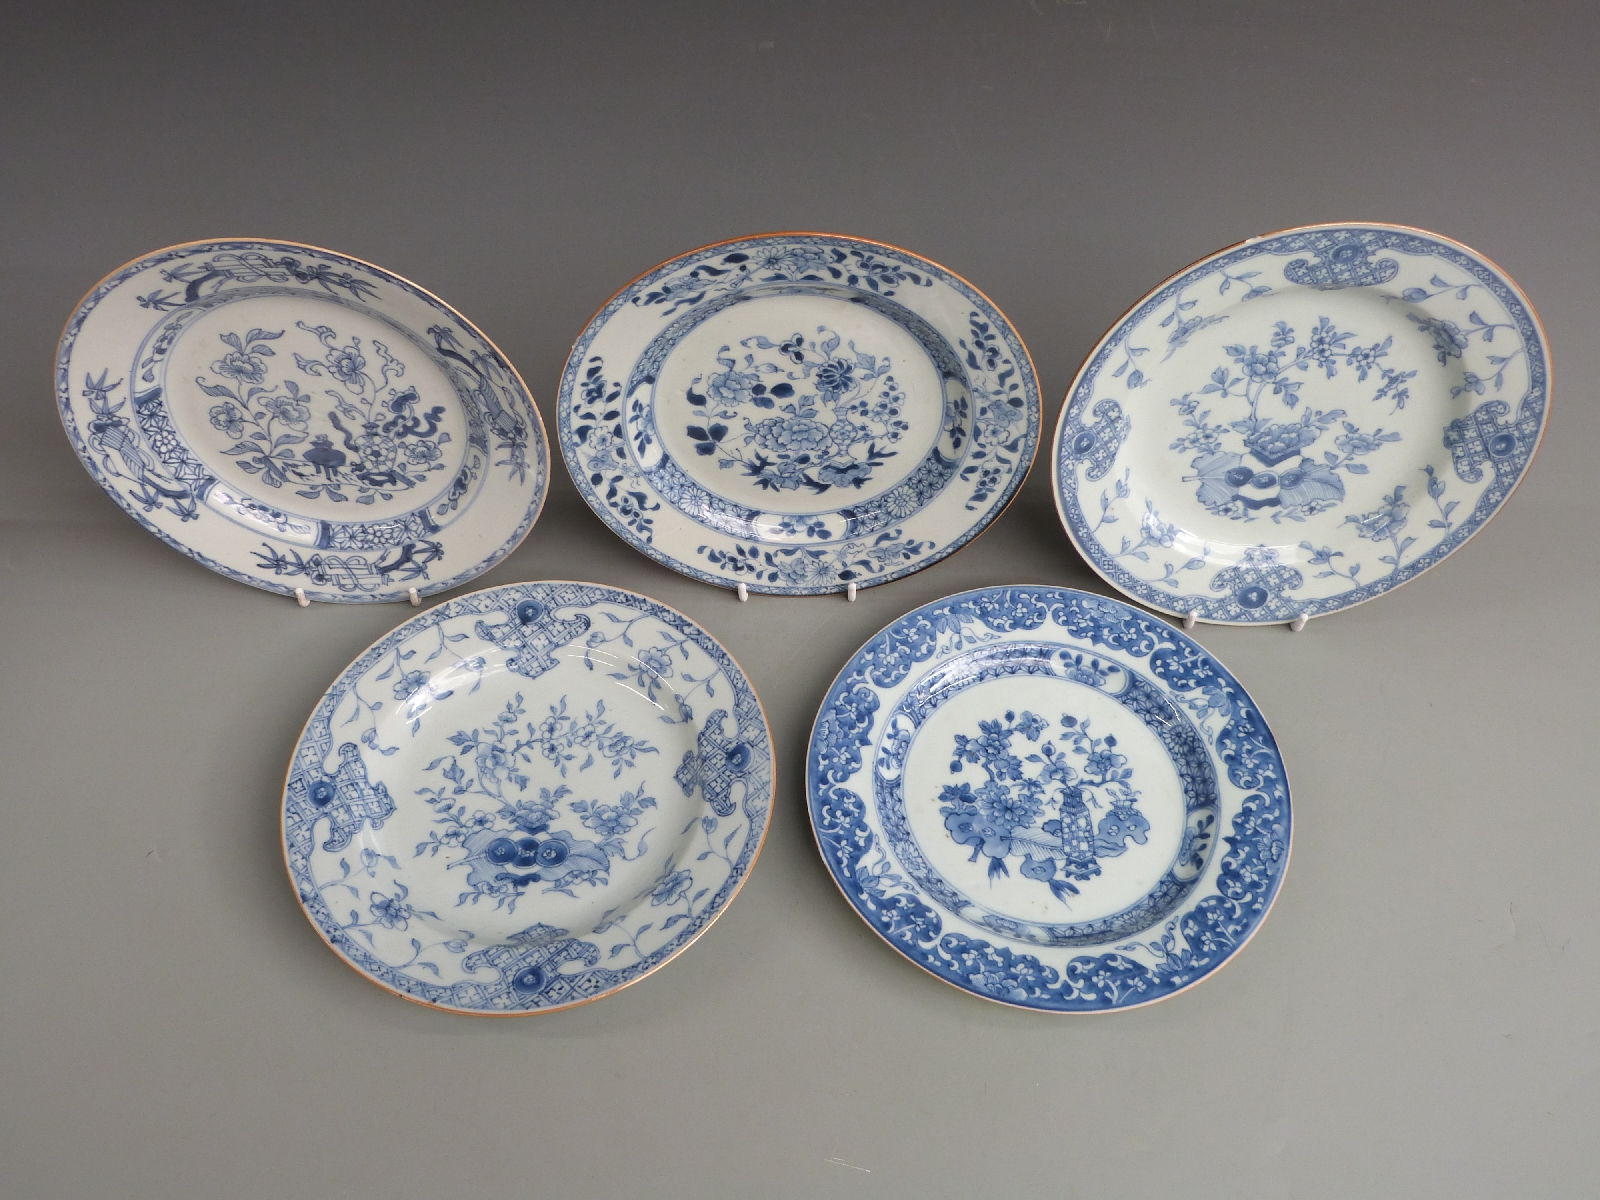 Five 19thC Chinese export plates decorated with vases of peonies, chrysanthemums, fruit and - Image 2 of 3